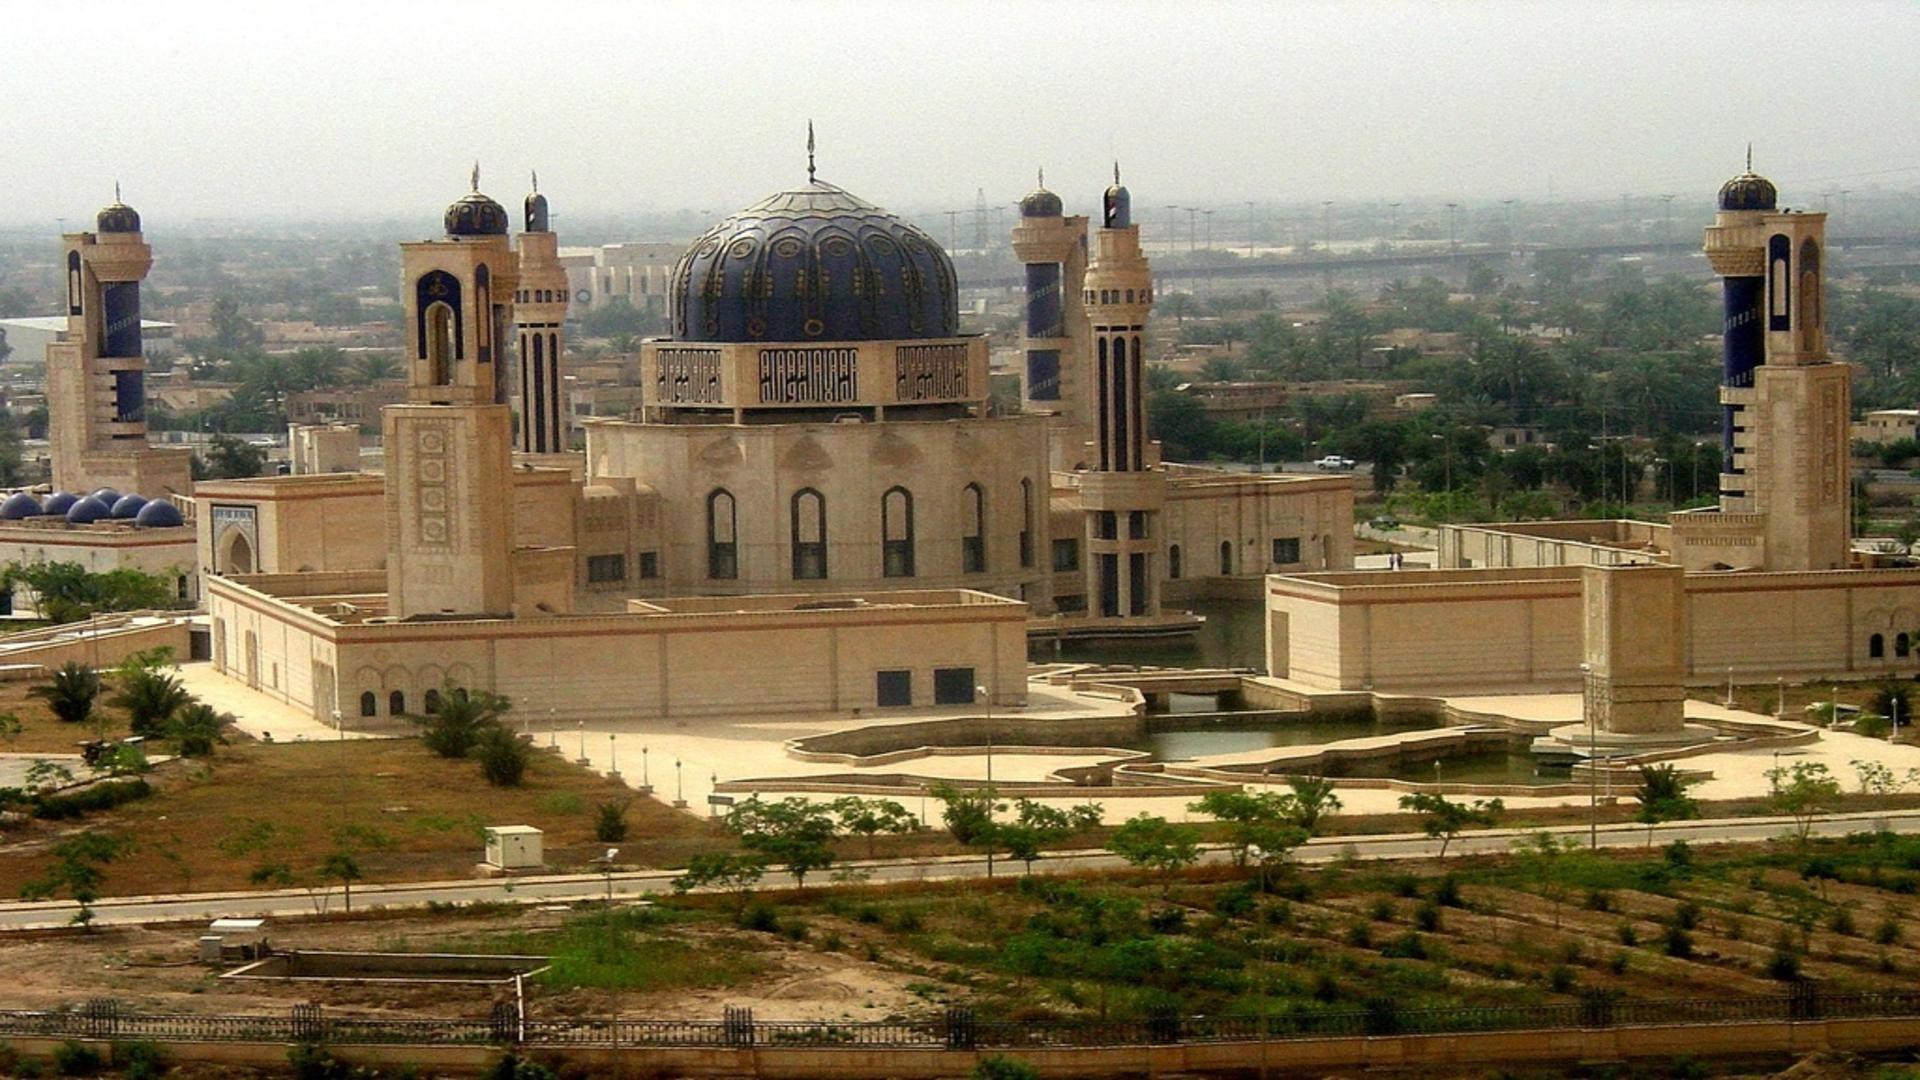 Are there enough mosques for worshipers in Uzbekistan?